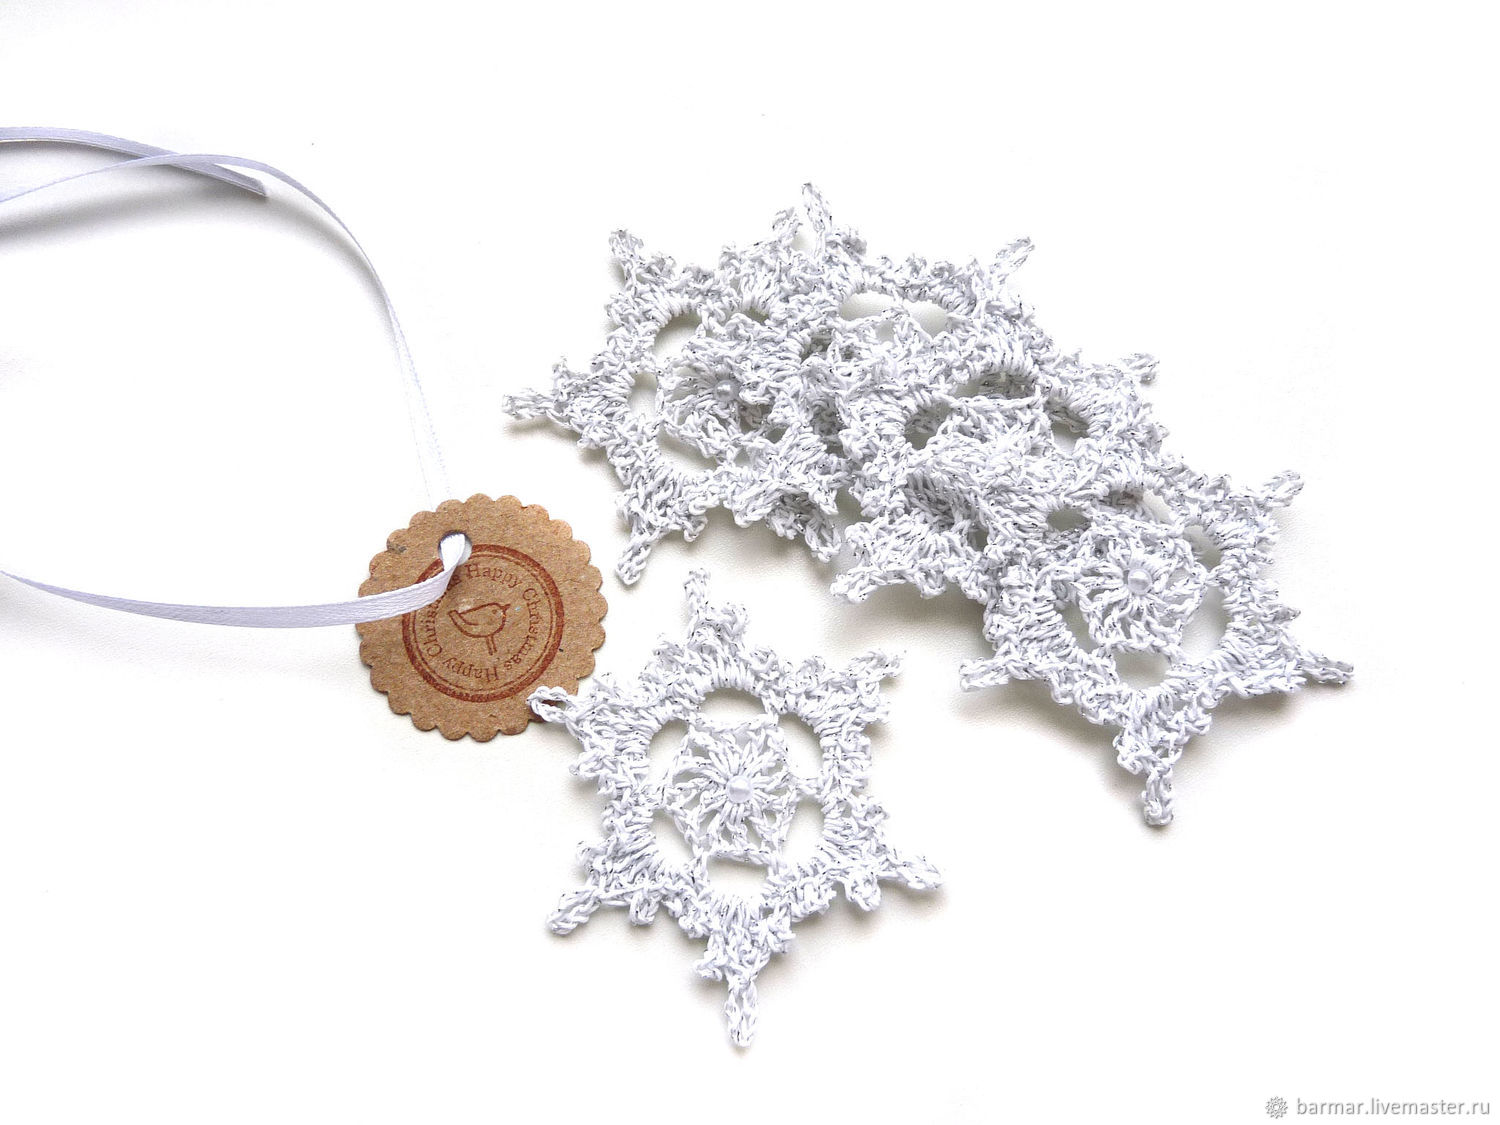 Snowflakes 5 pieces set 6,5 cm Silver Knitted, Christmas decorations, Moscow,  Фото №1